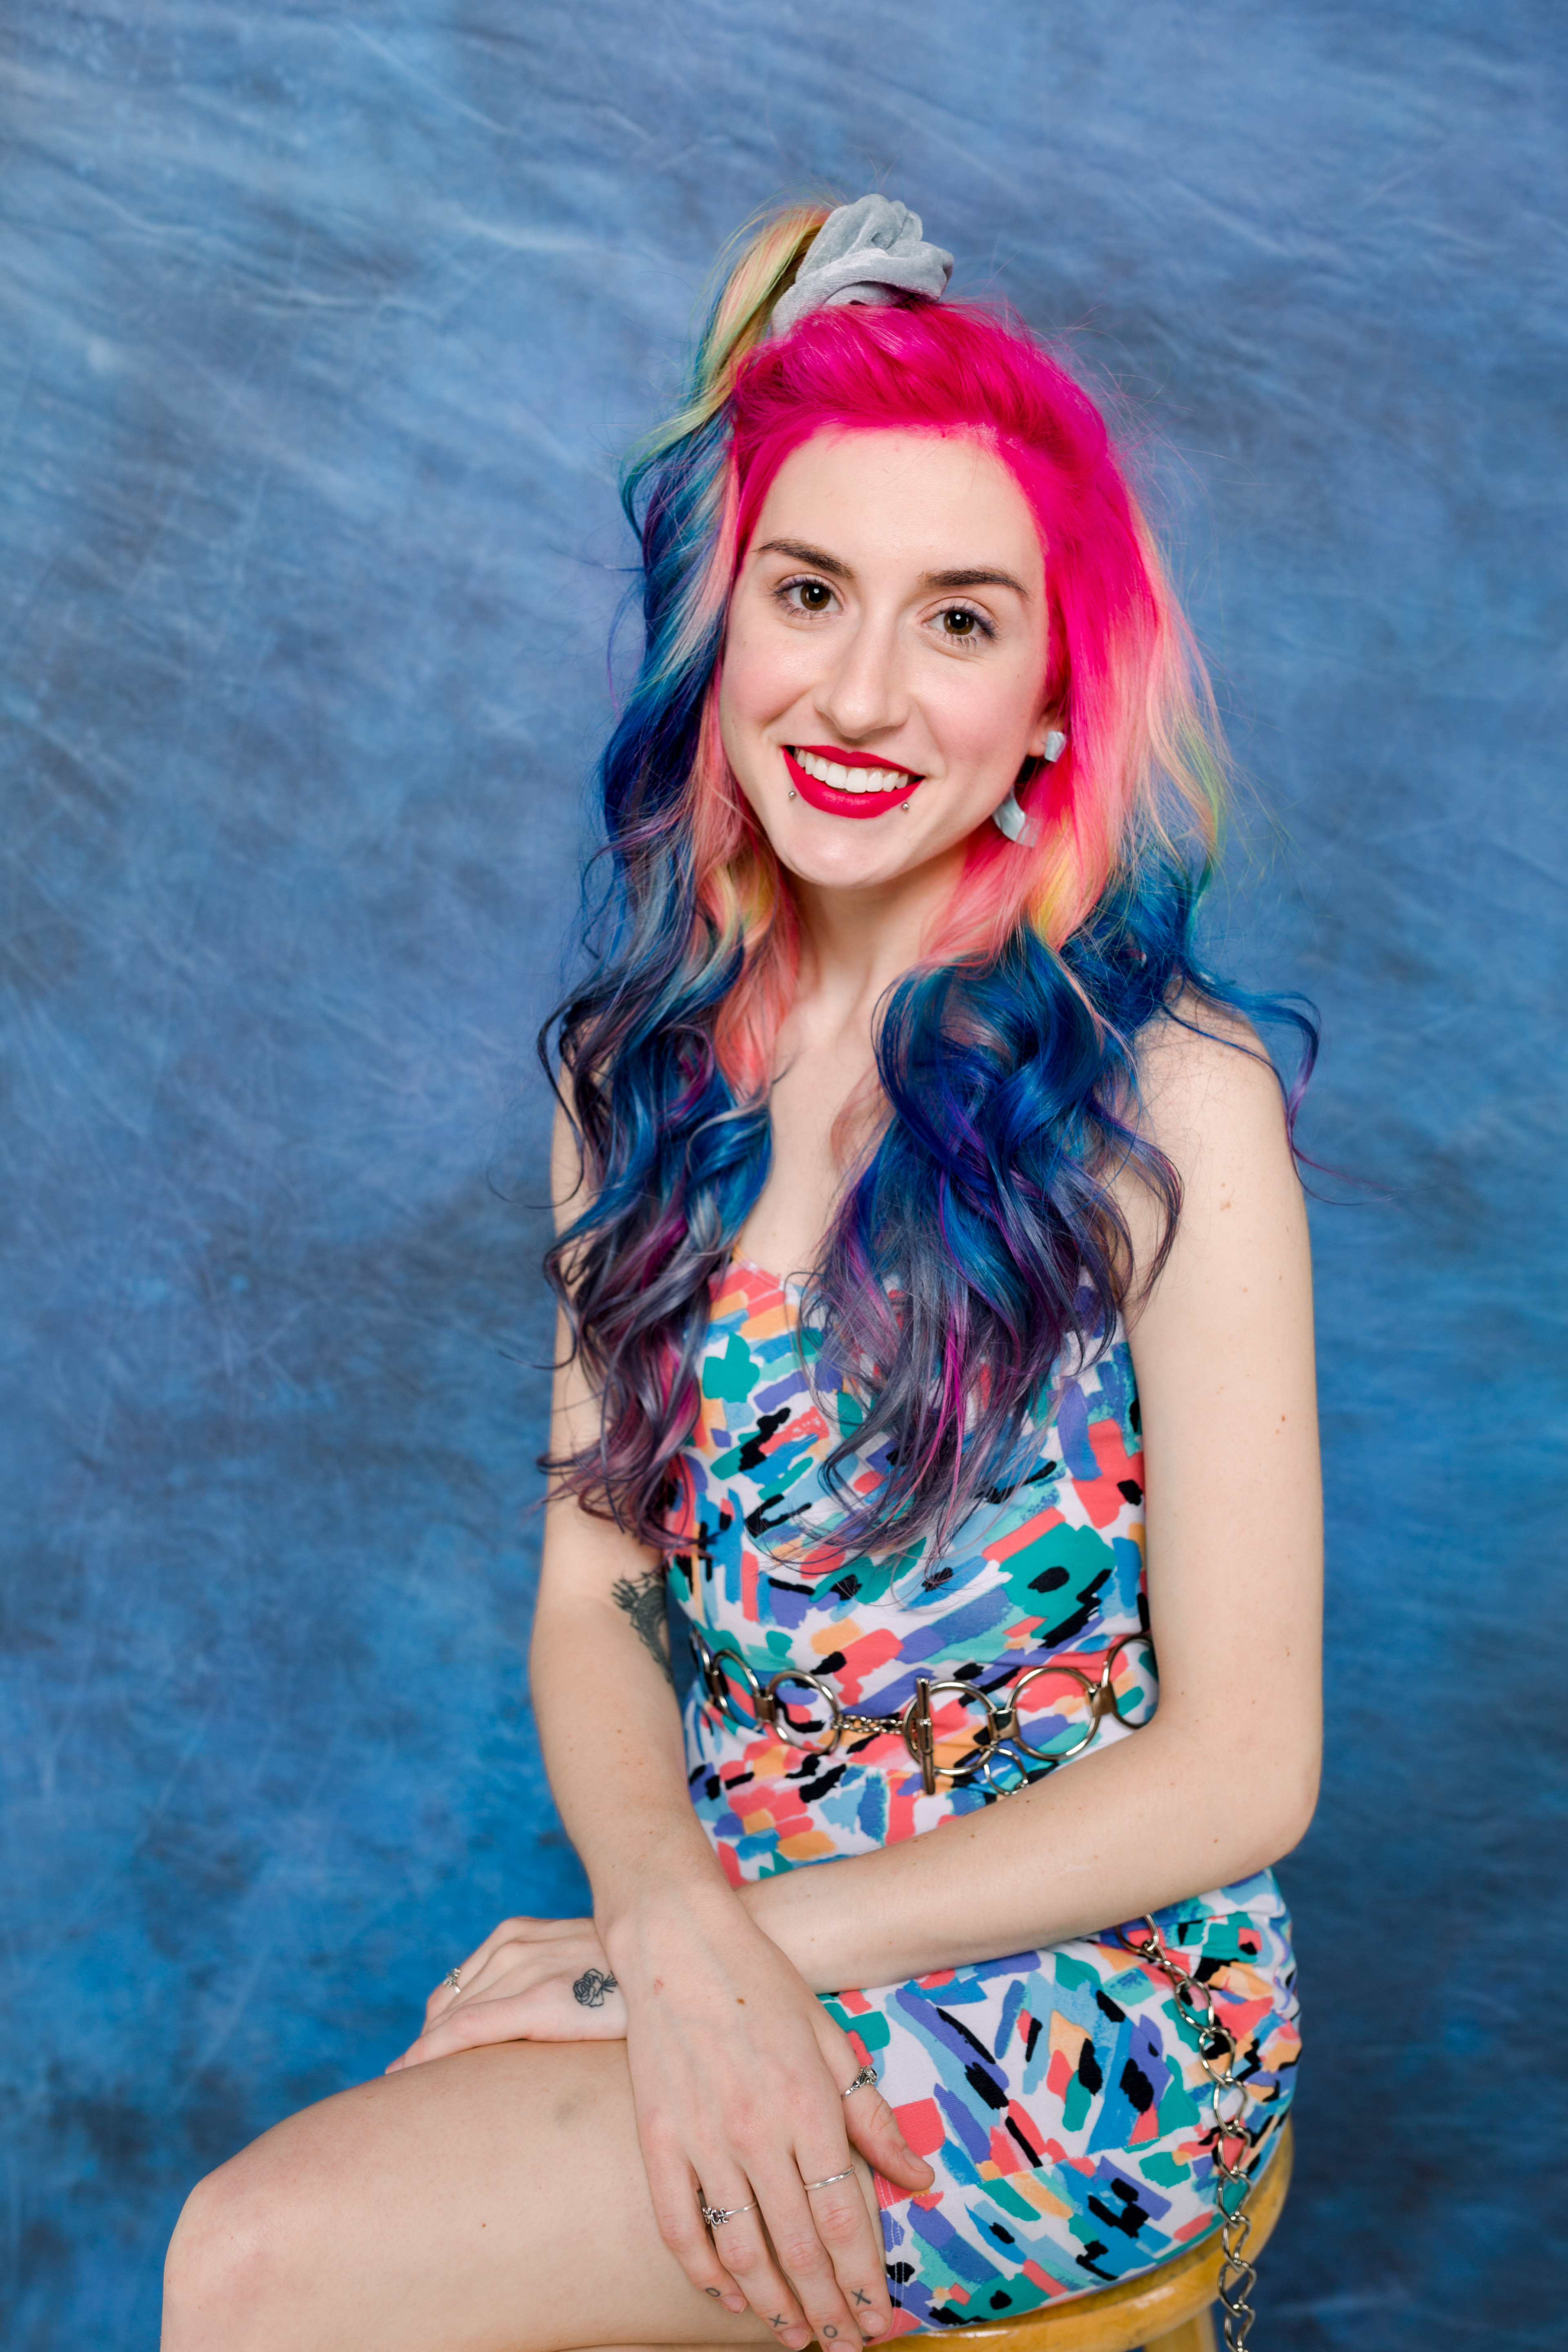 Saved By the Bell 90s inspired photoshoot with rainbow haired model portraying Kelly Kapowskisin Alpharetta GA by Jill Blue Photography and Glitter and Geeks Salon